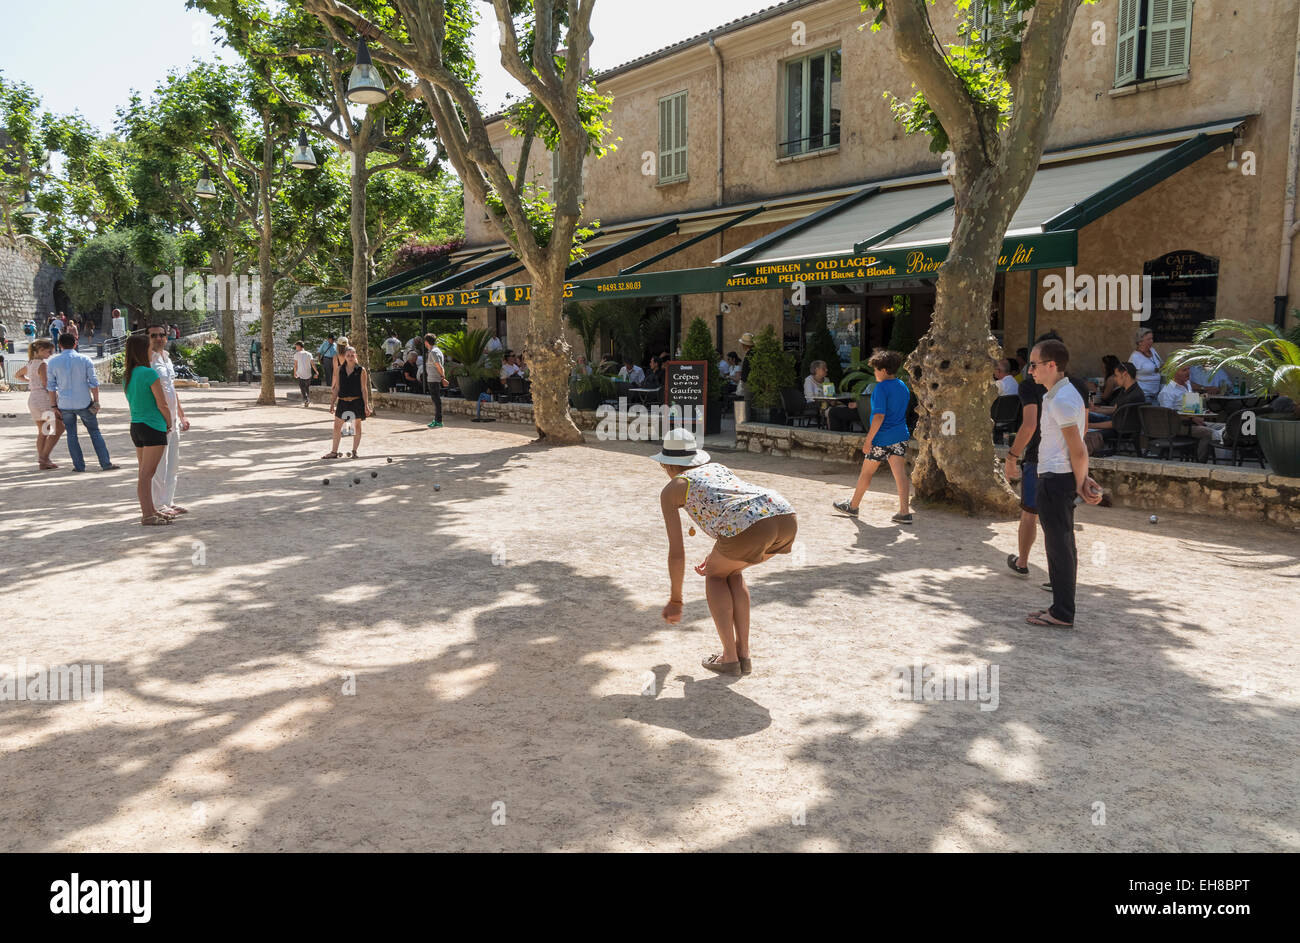 People playing boules / petanque outside a cafe in Saint-Paul-de-Vence, Alpes-Maritimes, Provence, France, Europe Stock Photo